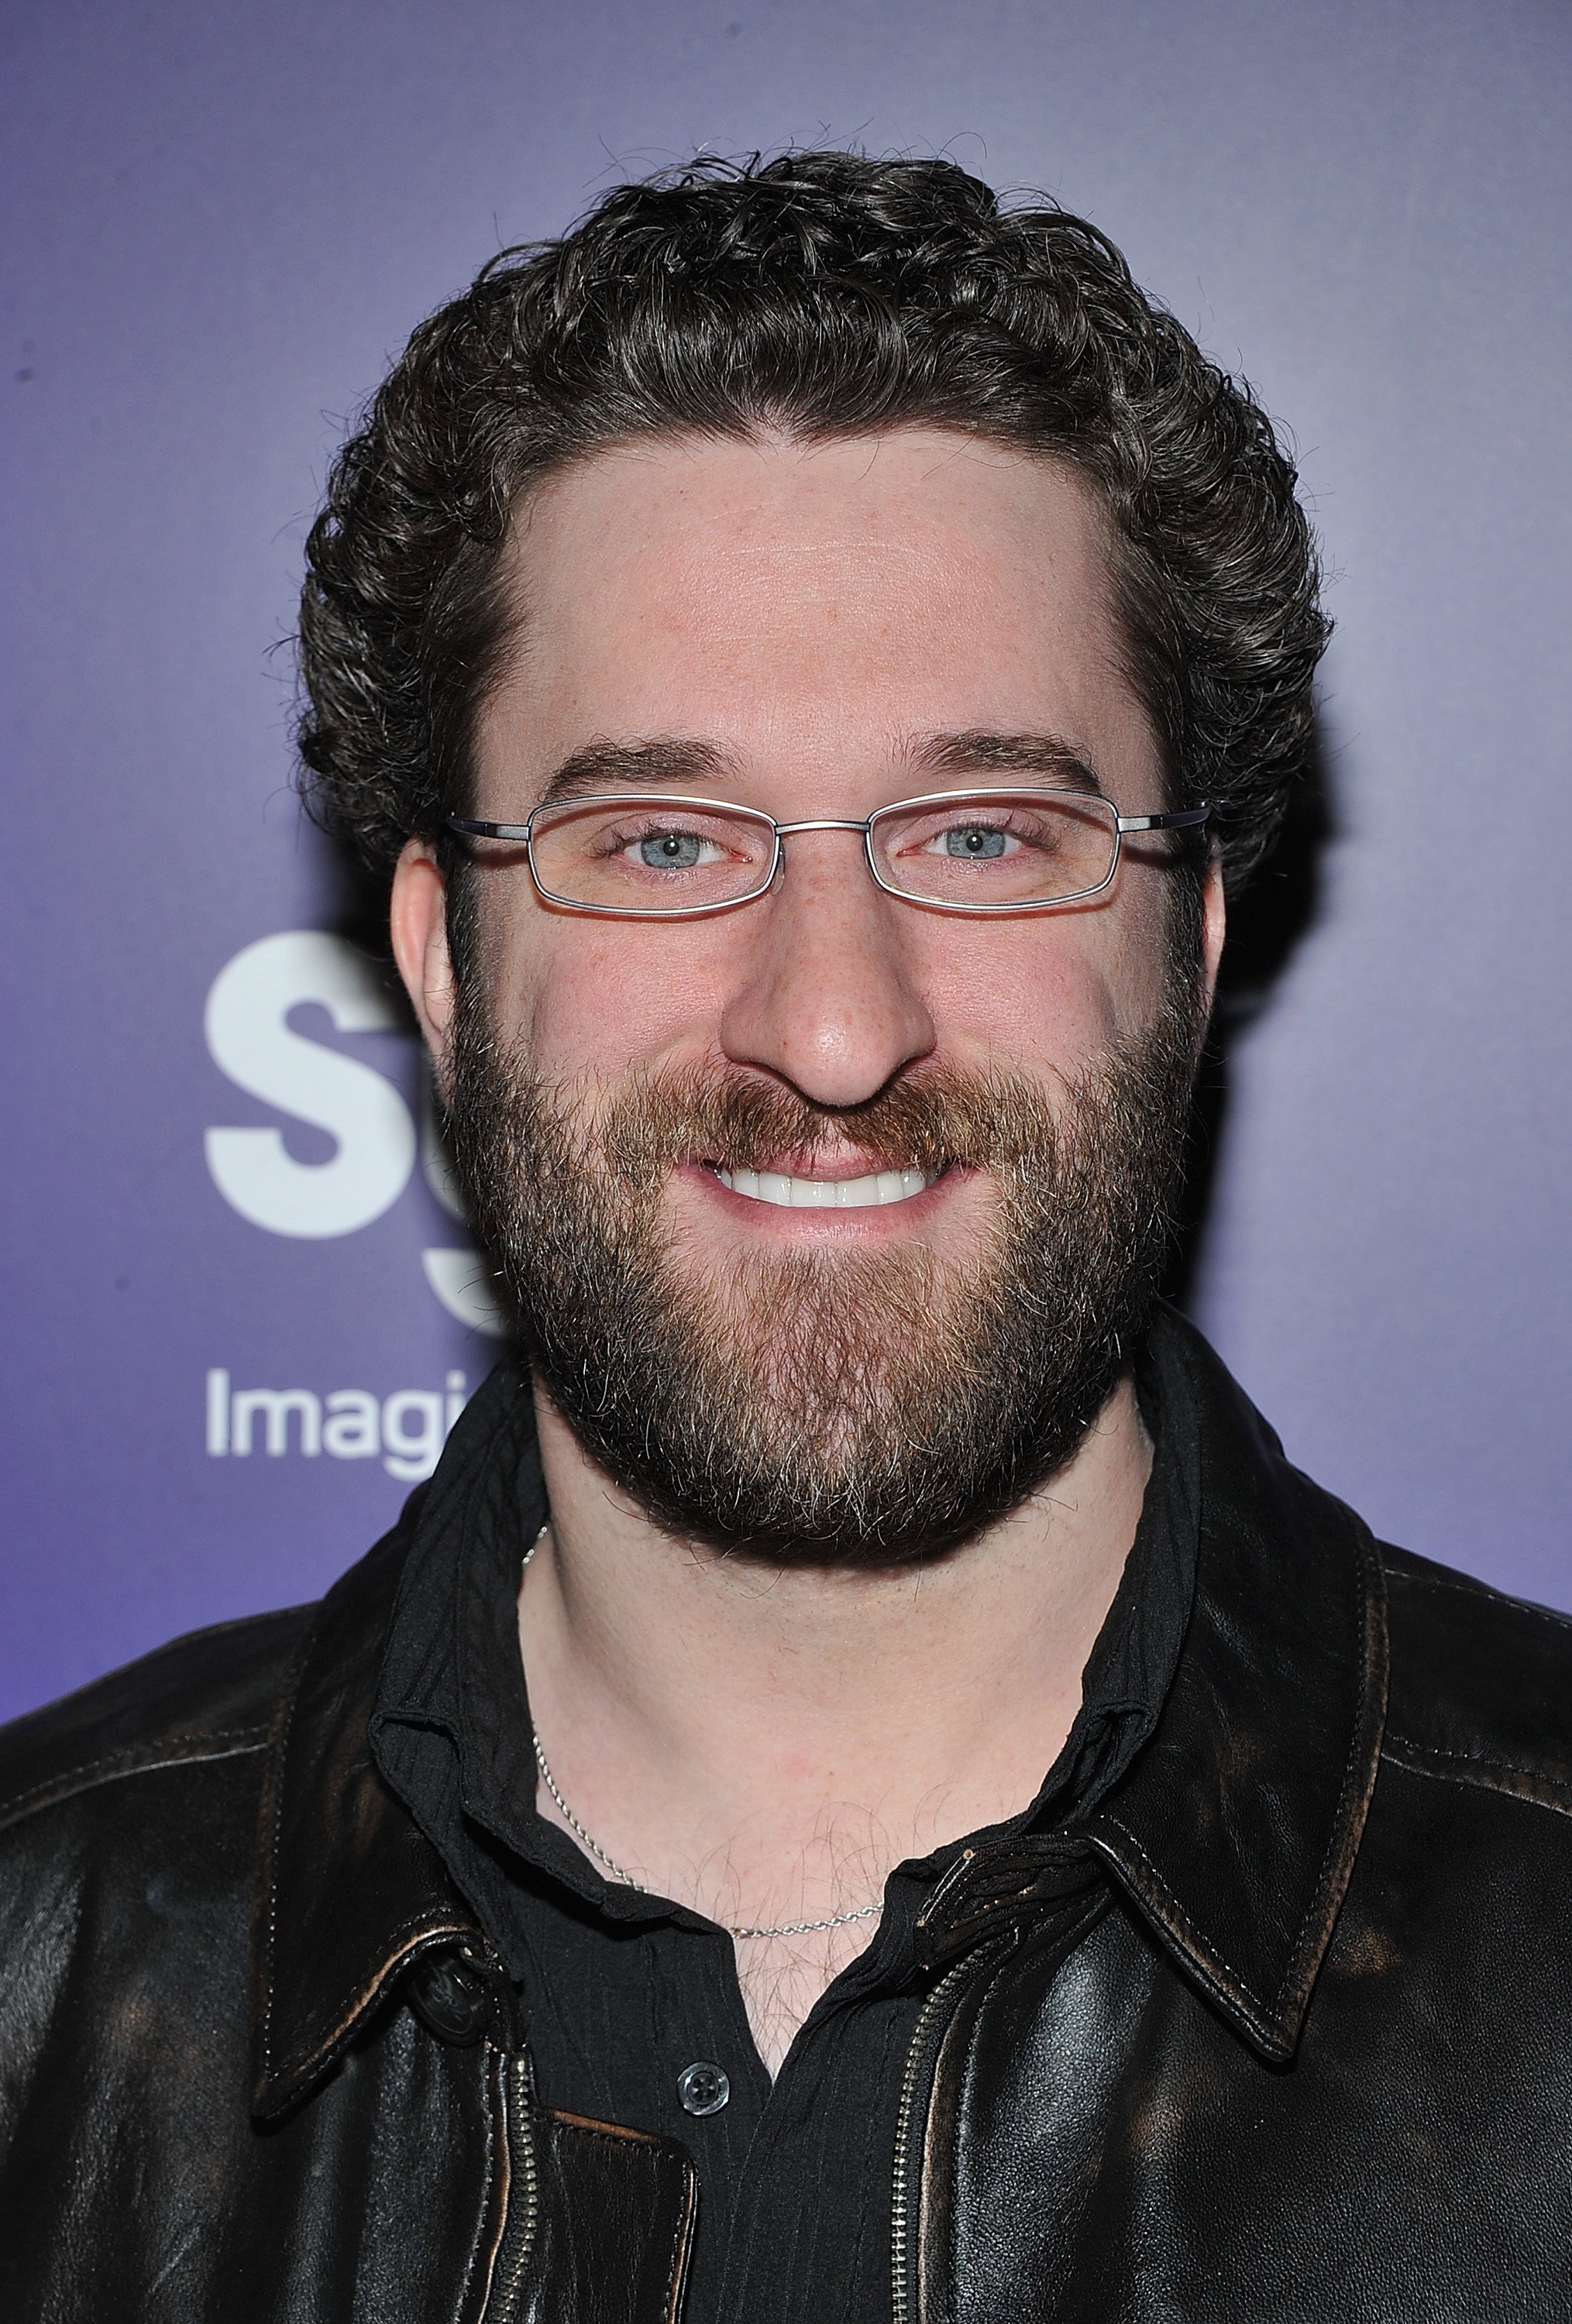 Dustin Diamond attends the "Mega Python vs. Gatoroid" premiere at the Ziegfeld Theatre on January 24, 2011 in New York City. | Source: Getty Images